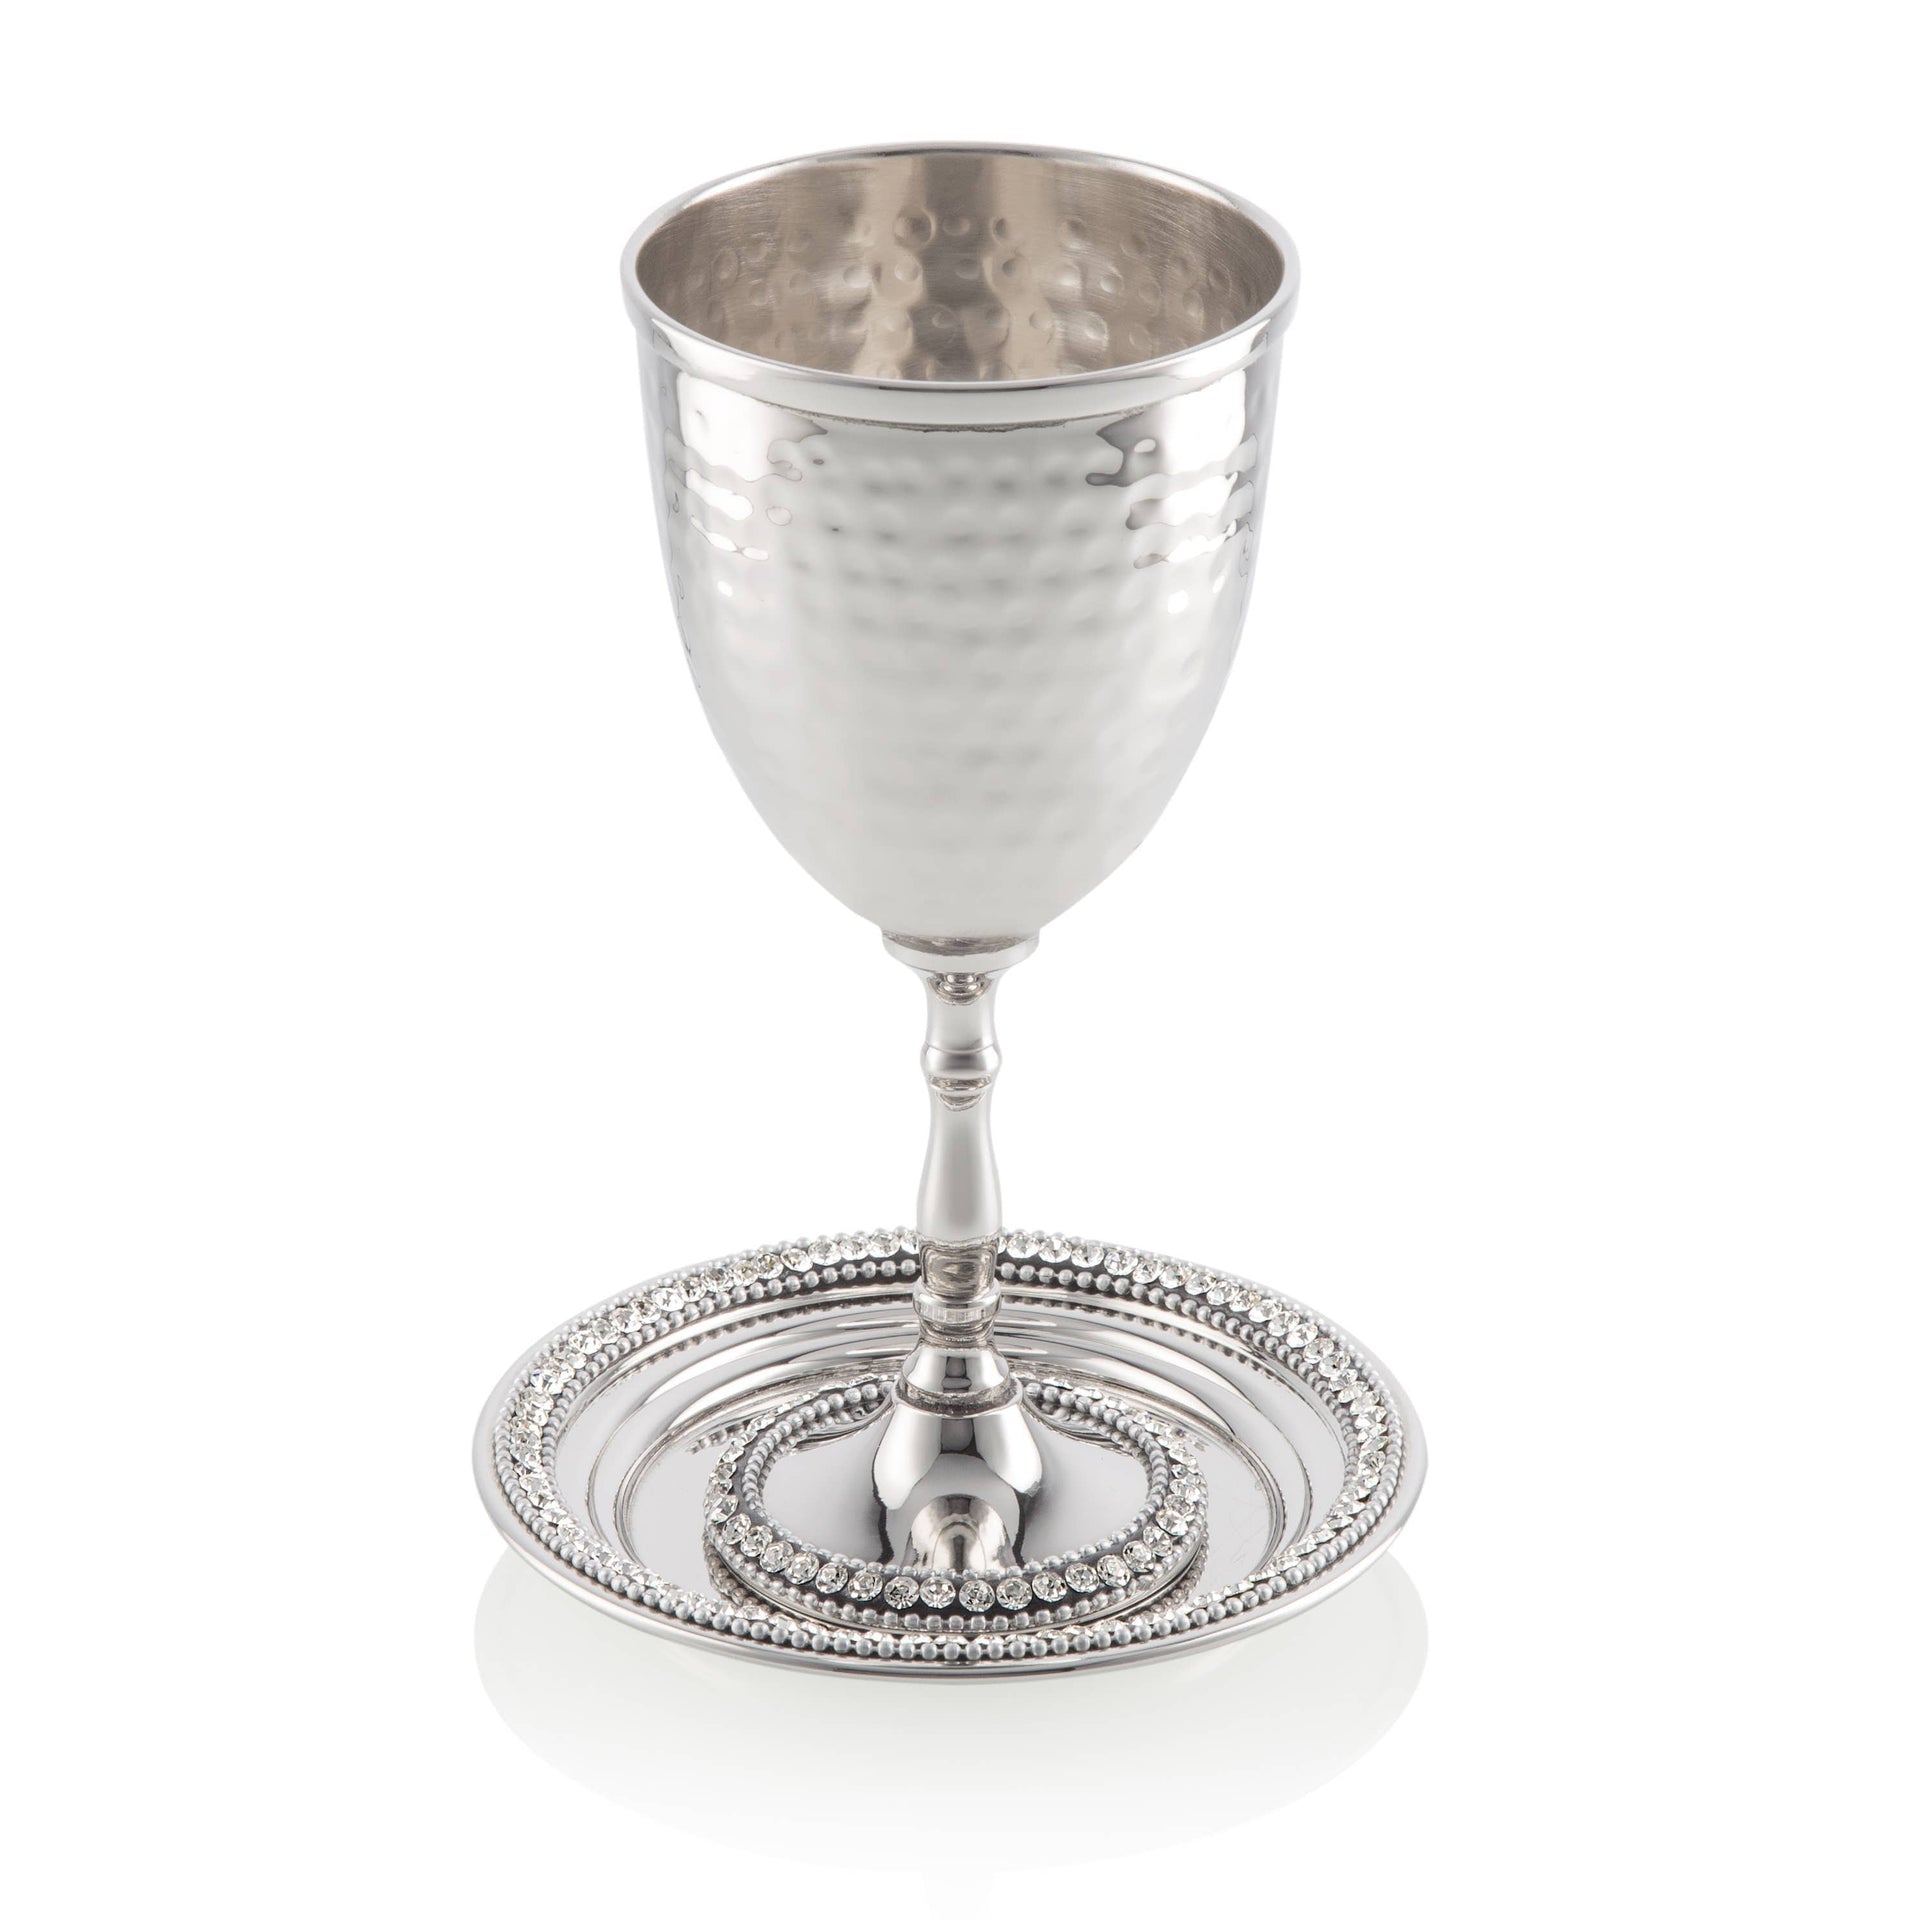 Classic Touch Decor Kiddush Cups Stainless Steel Kiddush Cup on Tray